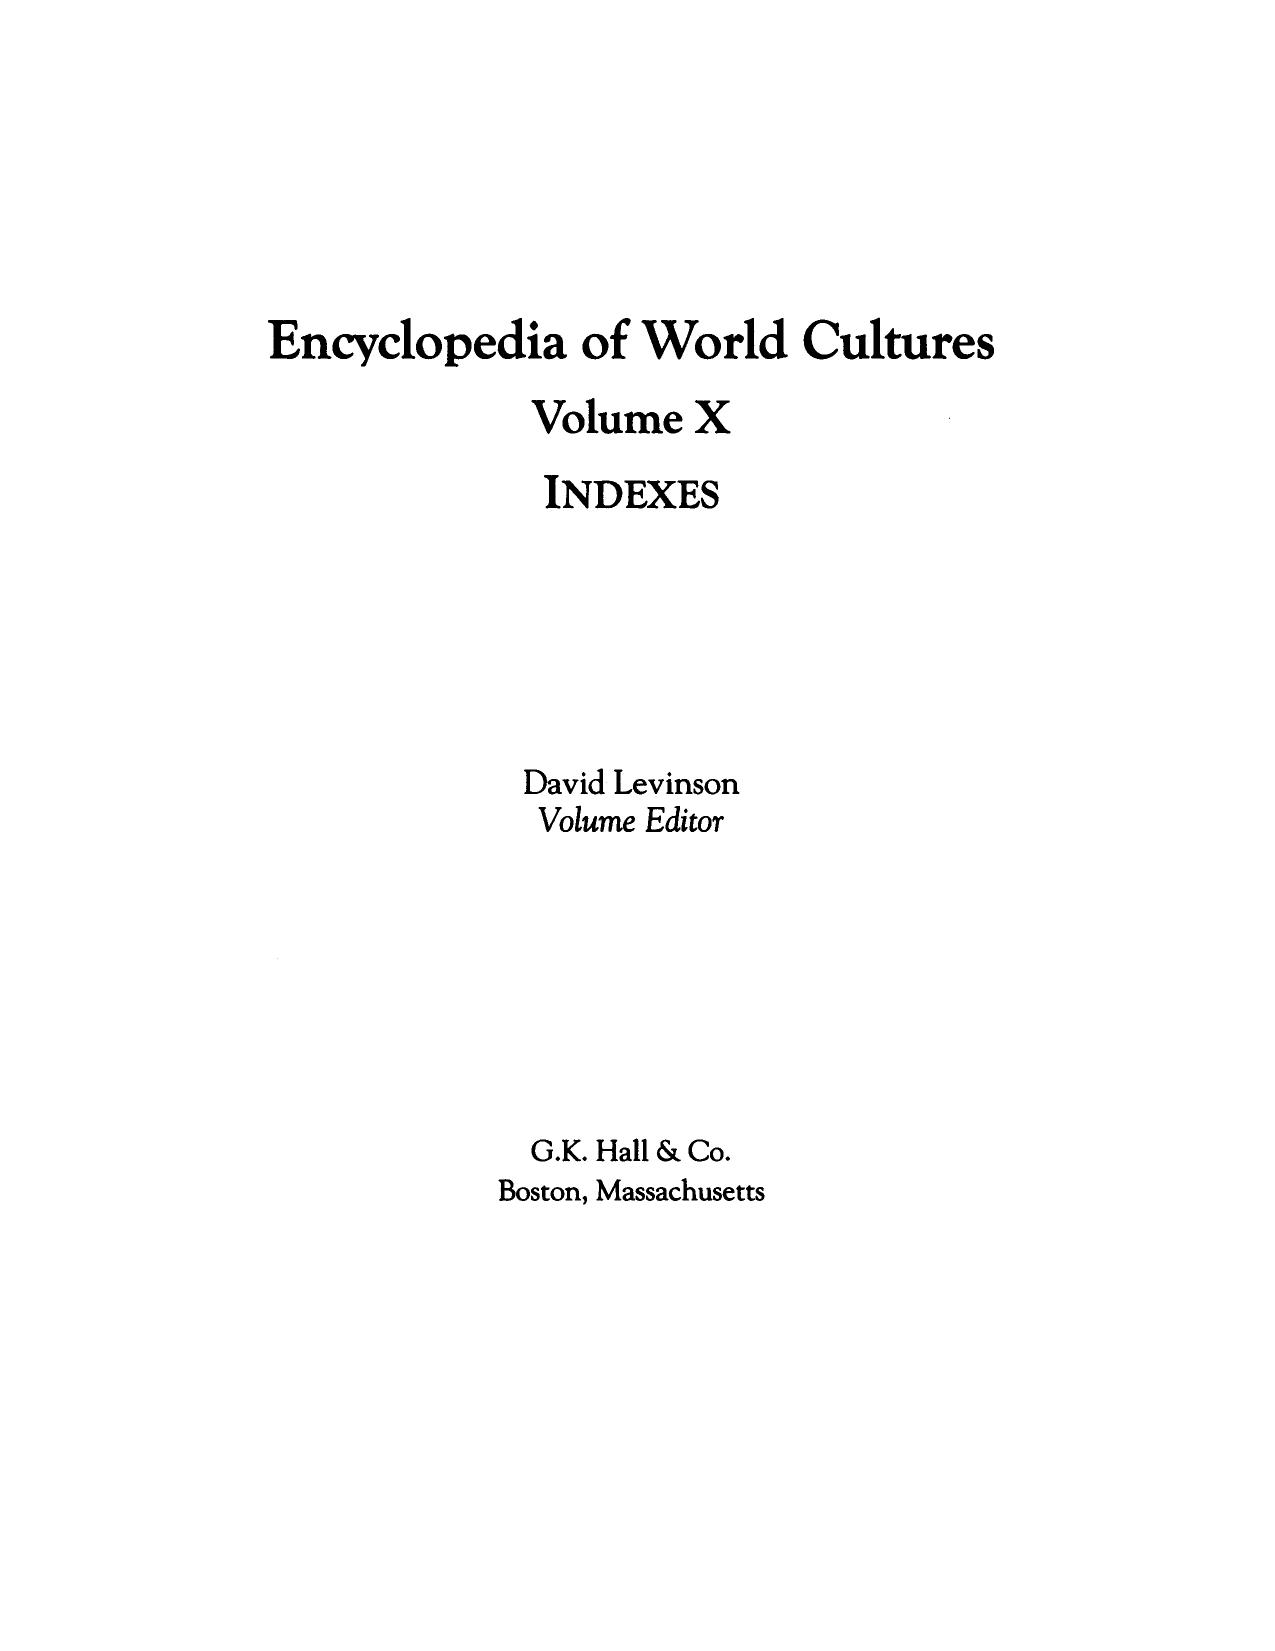 Encyclopedia of World Cultures Indexes, Vol. 10